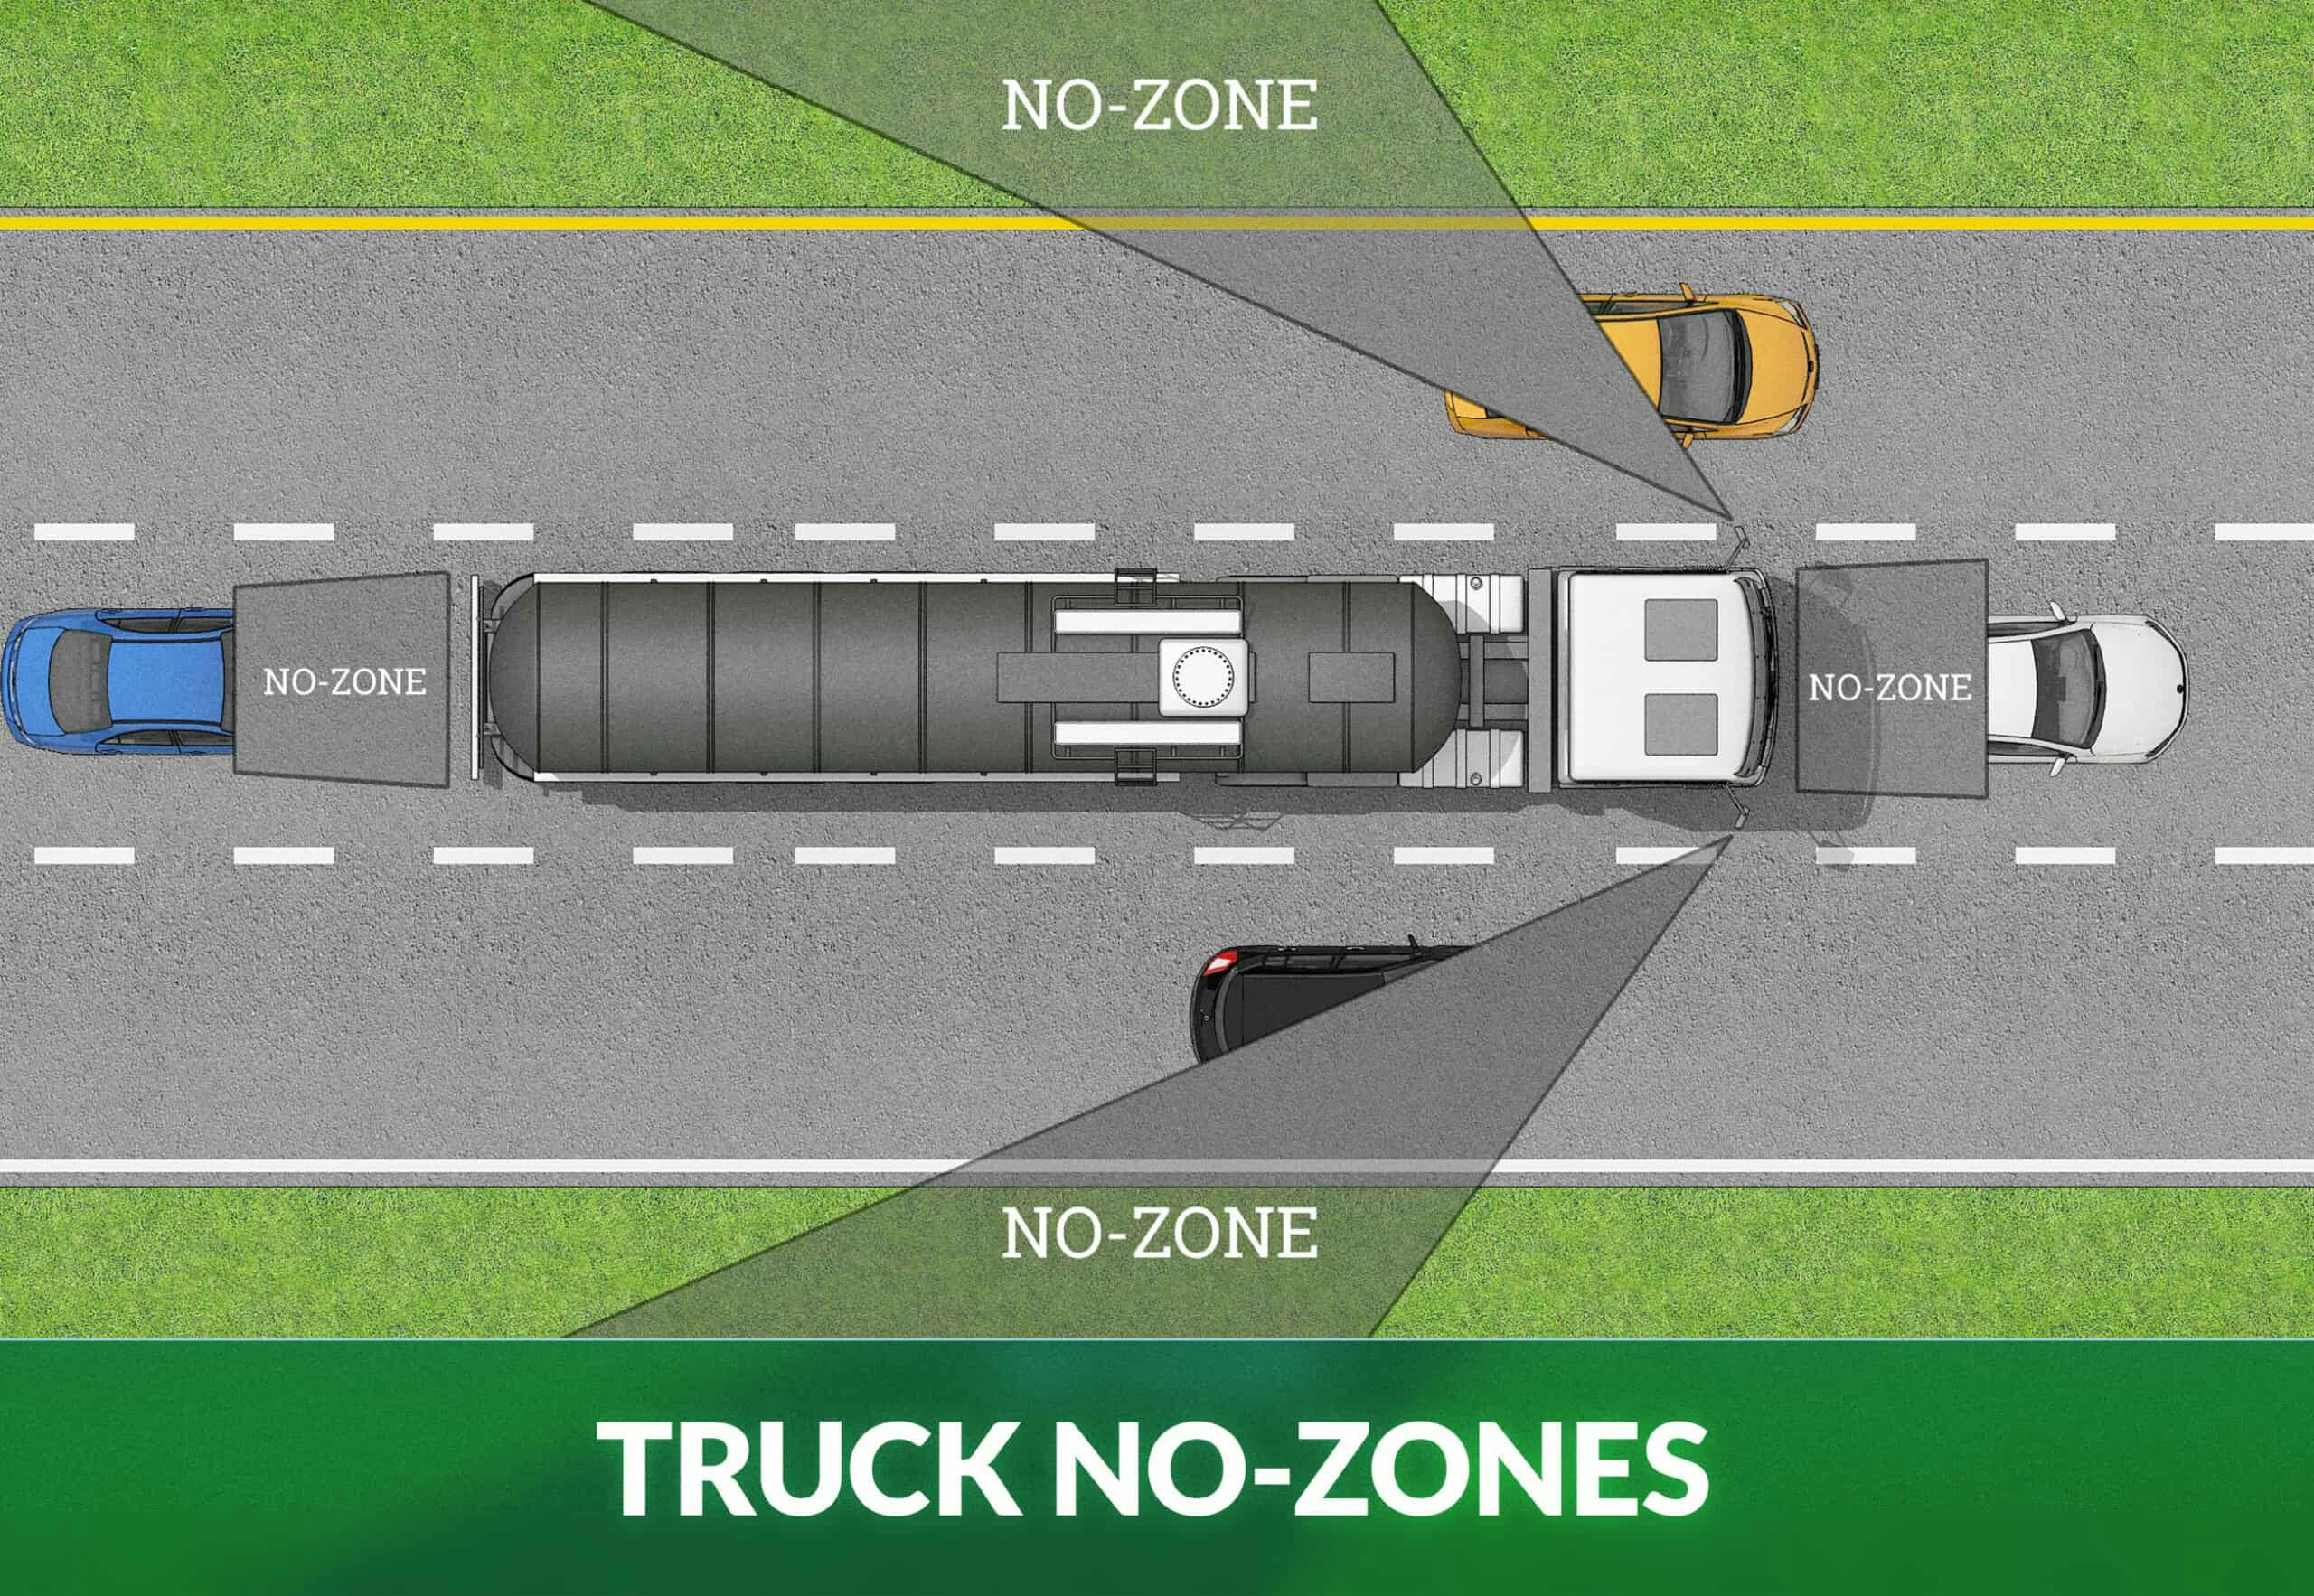 the time you travel in large vehicles' no zones